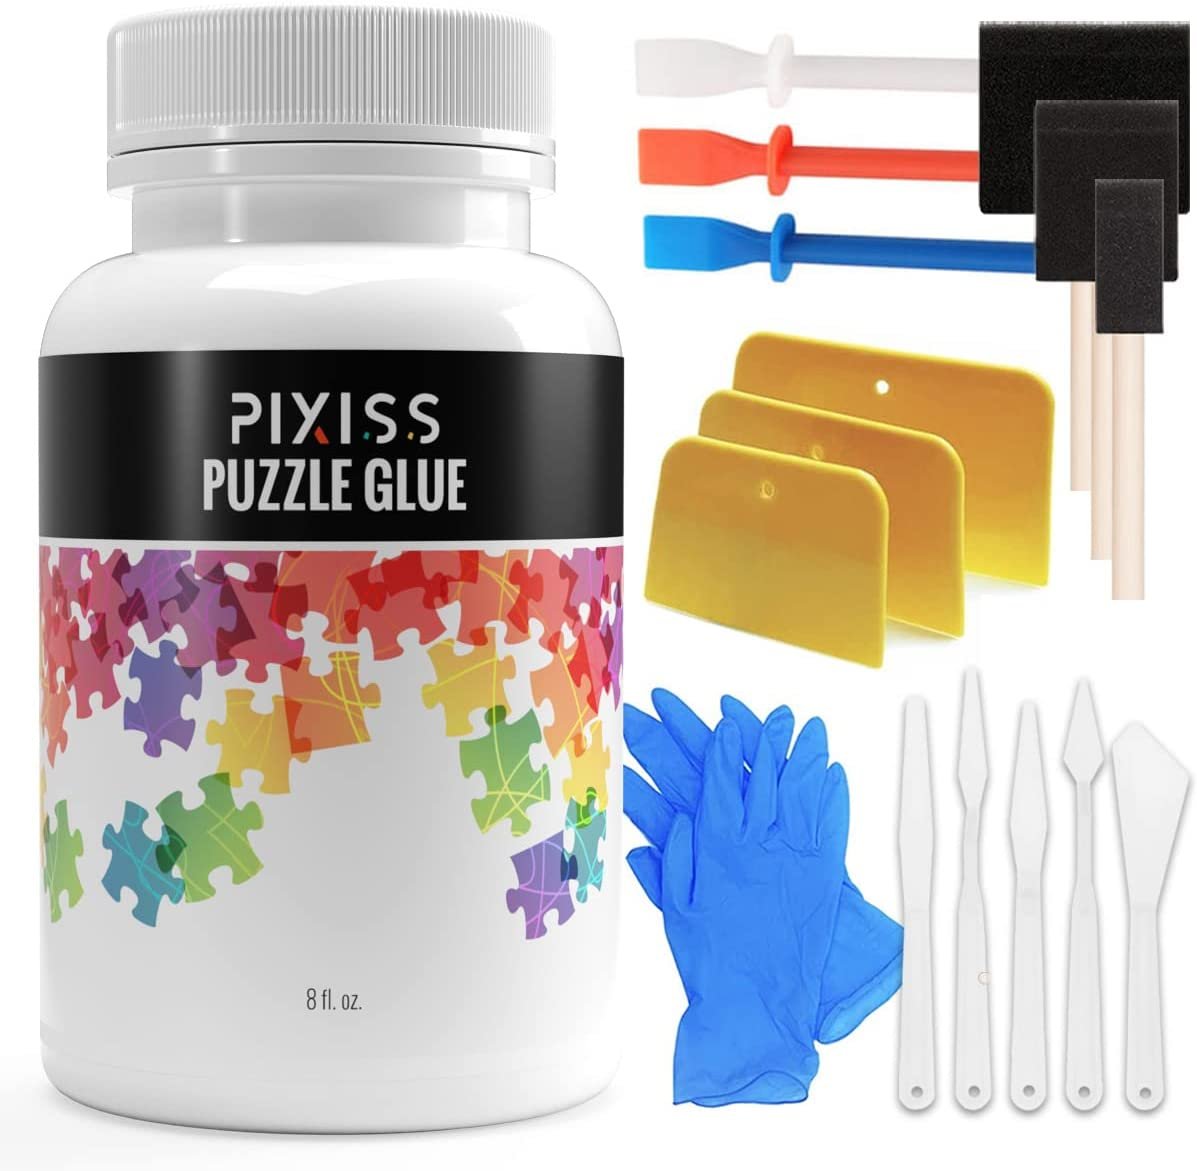 Pixiss Puzzle Saver Glue Kit, Adhesive Brushes for Jigsaw Puzzles, Boards,  Mats, with Pixiss Accessory Kit 